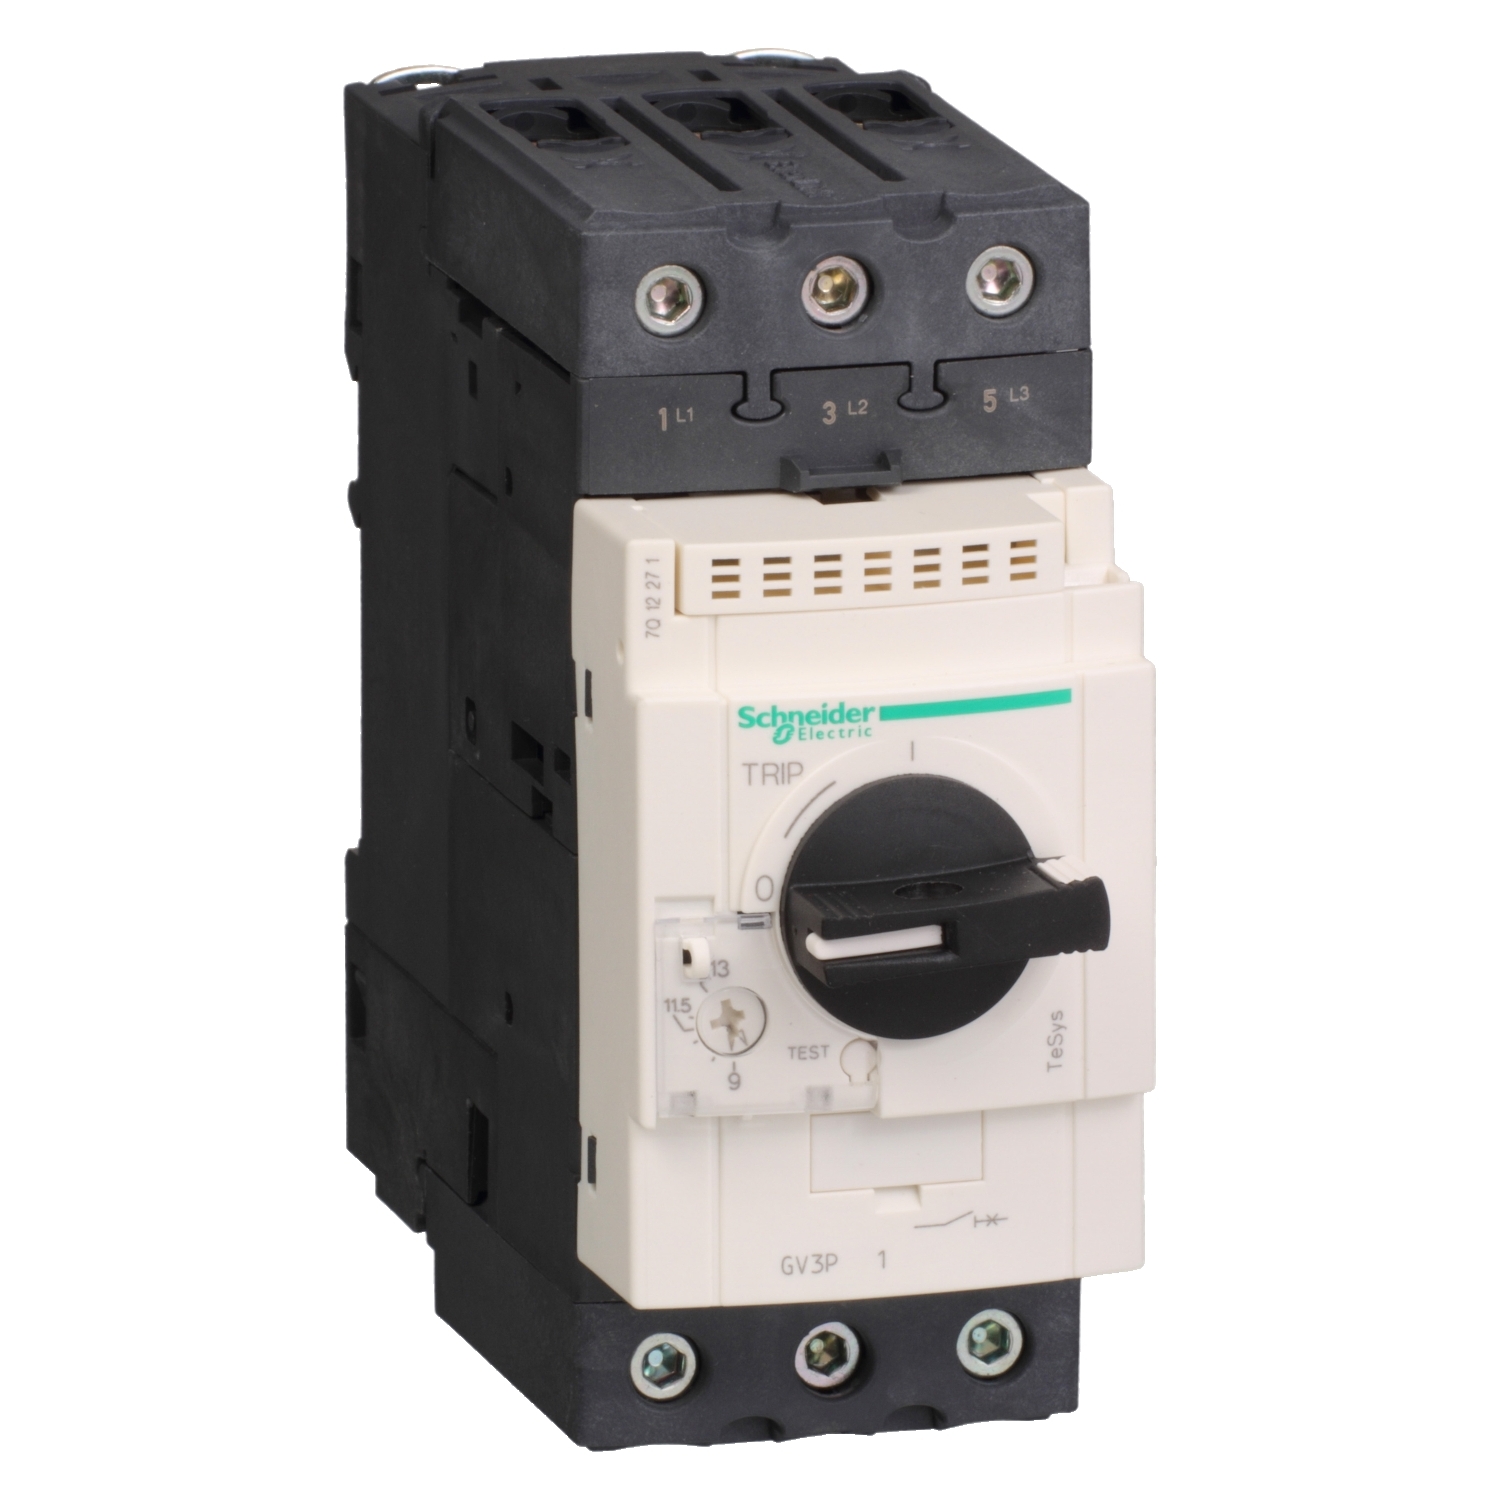 Motor circuit breaker, TeSys Deca, 3P, 12 to 18A, thermal magnetic, EverLink terminals